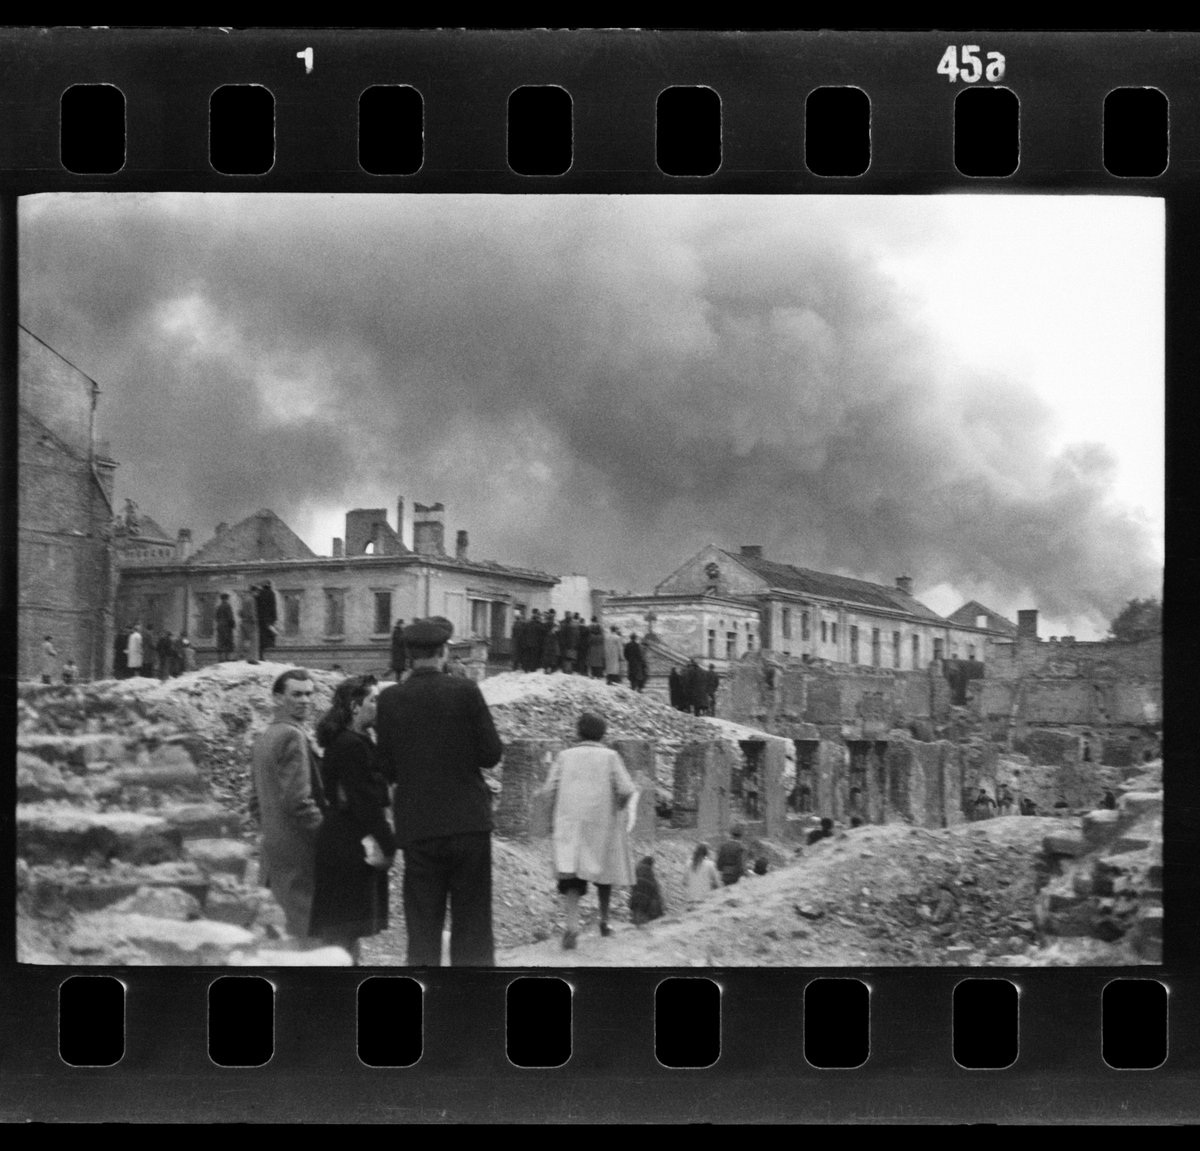 On 19 April 1943, the #WarsawGhettoUprising broke out. Over 400,000 Jews were confined to the Warsaw ghetto by the Germans. 81 years ago they took up an armed struggle against the occupier. 📸Burning ghetto in the background, R.Damec, @polinmuseum collection, Damec family archive